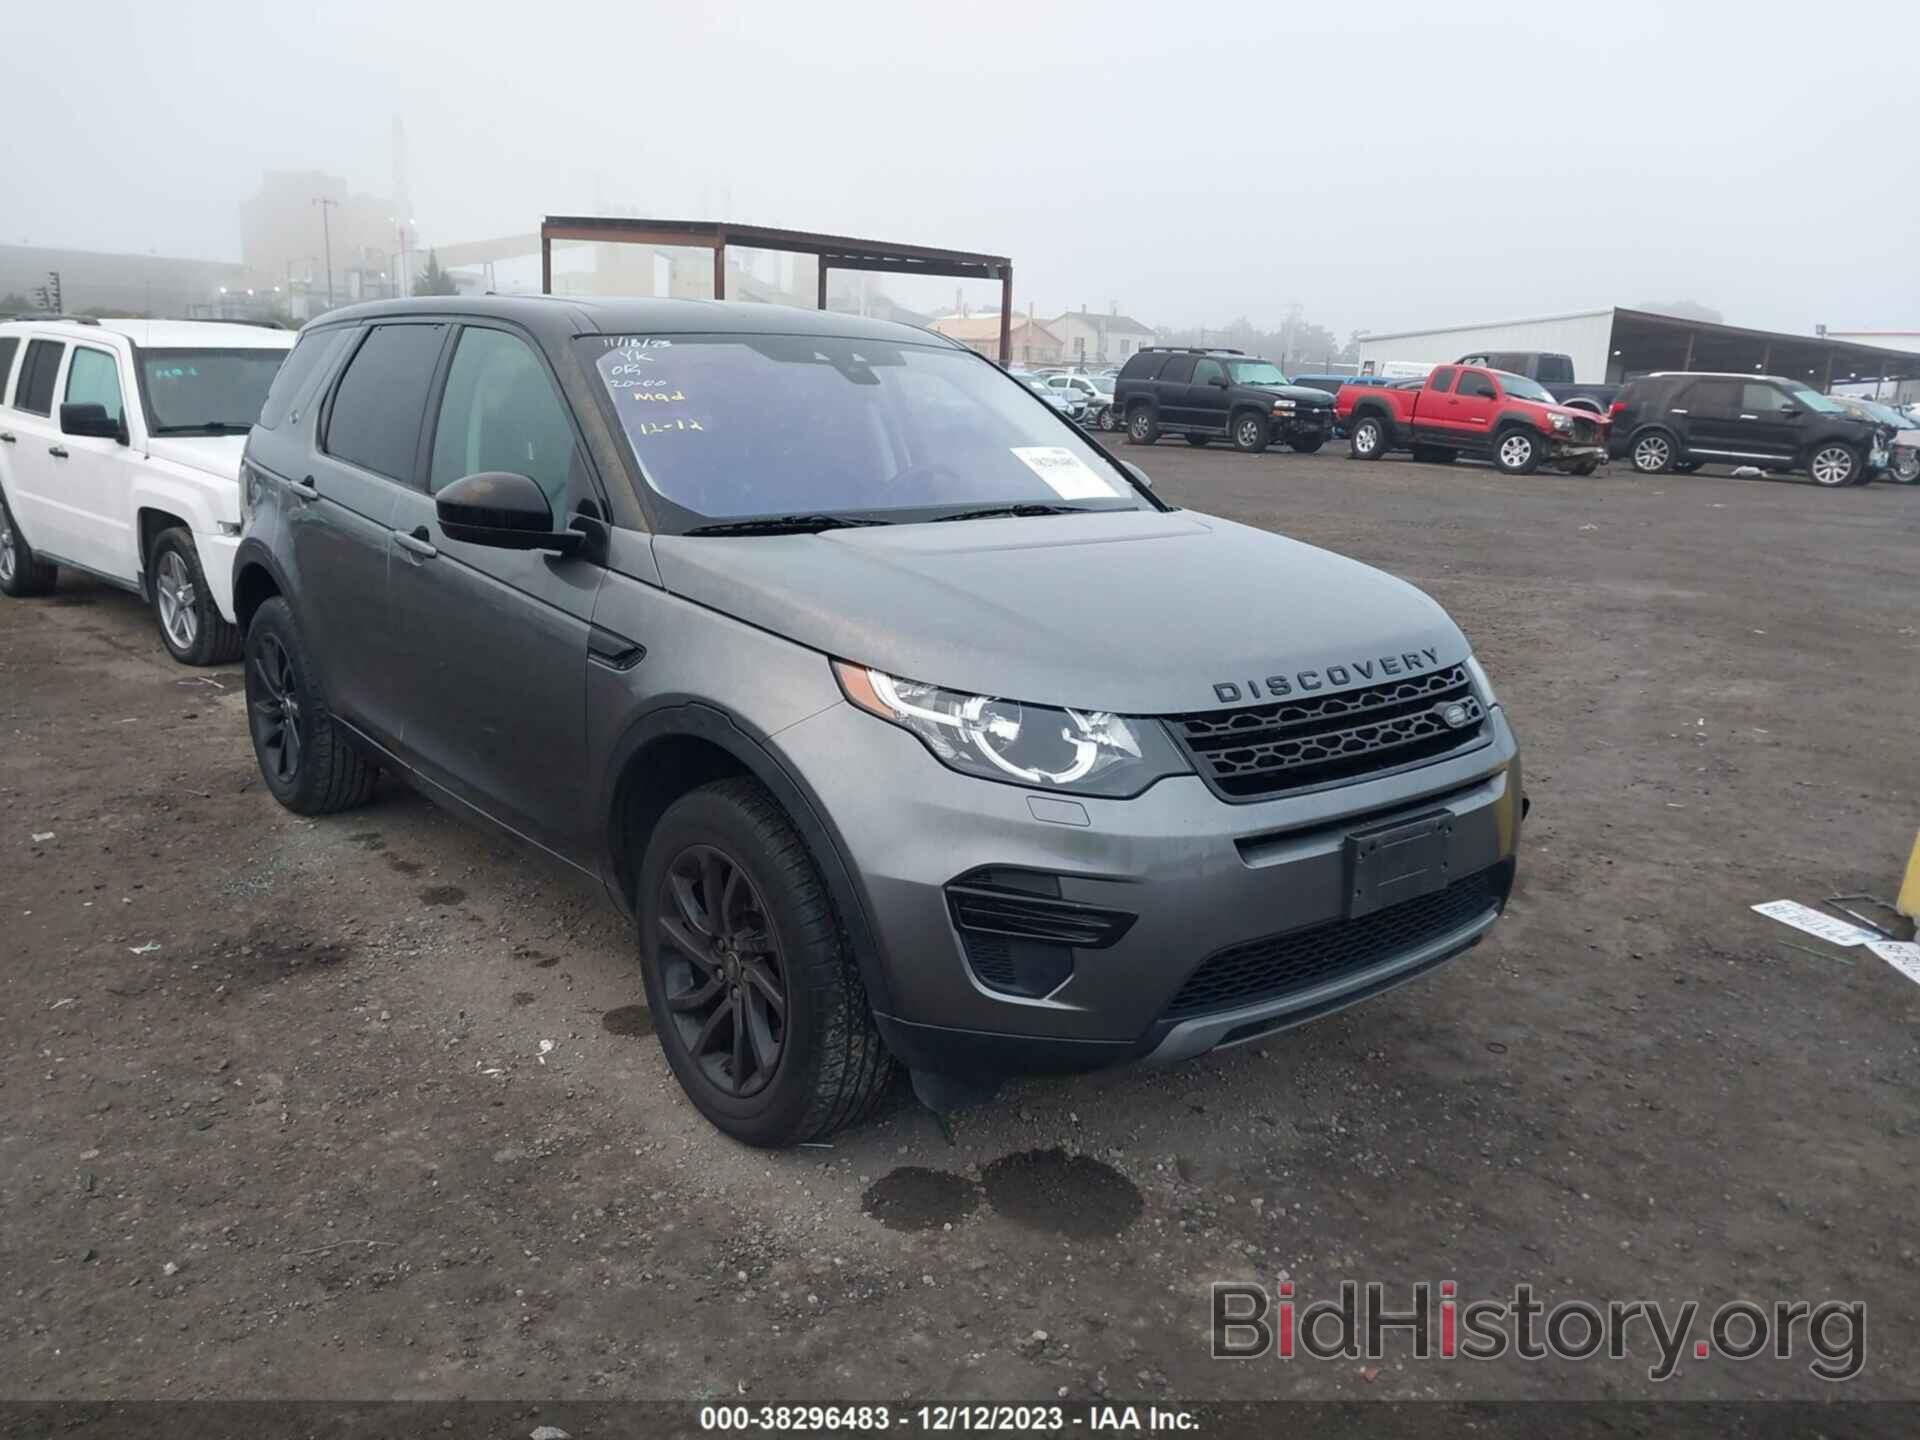 Фотография SALCP2RX9JH750769 - LAND ROVER DISCOVERY SPORT 2018